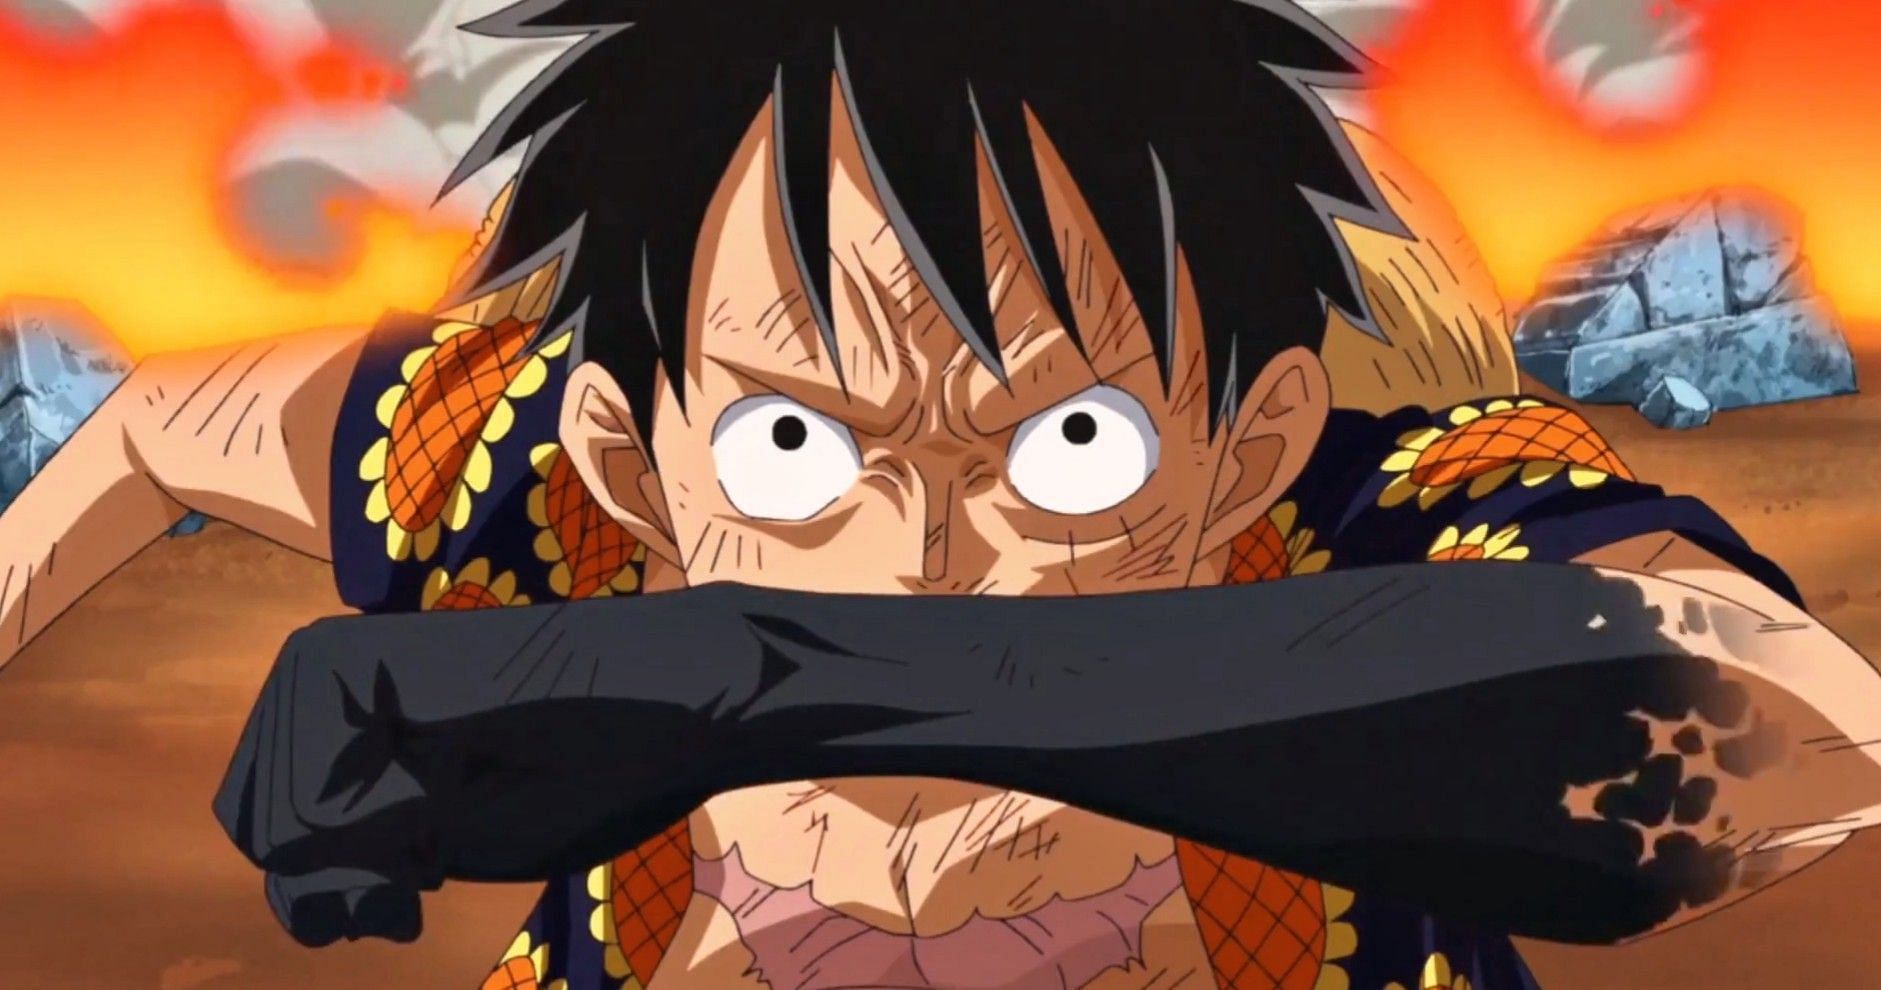 Luffy using Haki on his arm in One Piece (Image via Toei Animation)